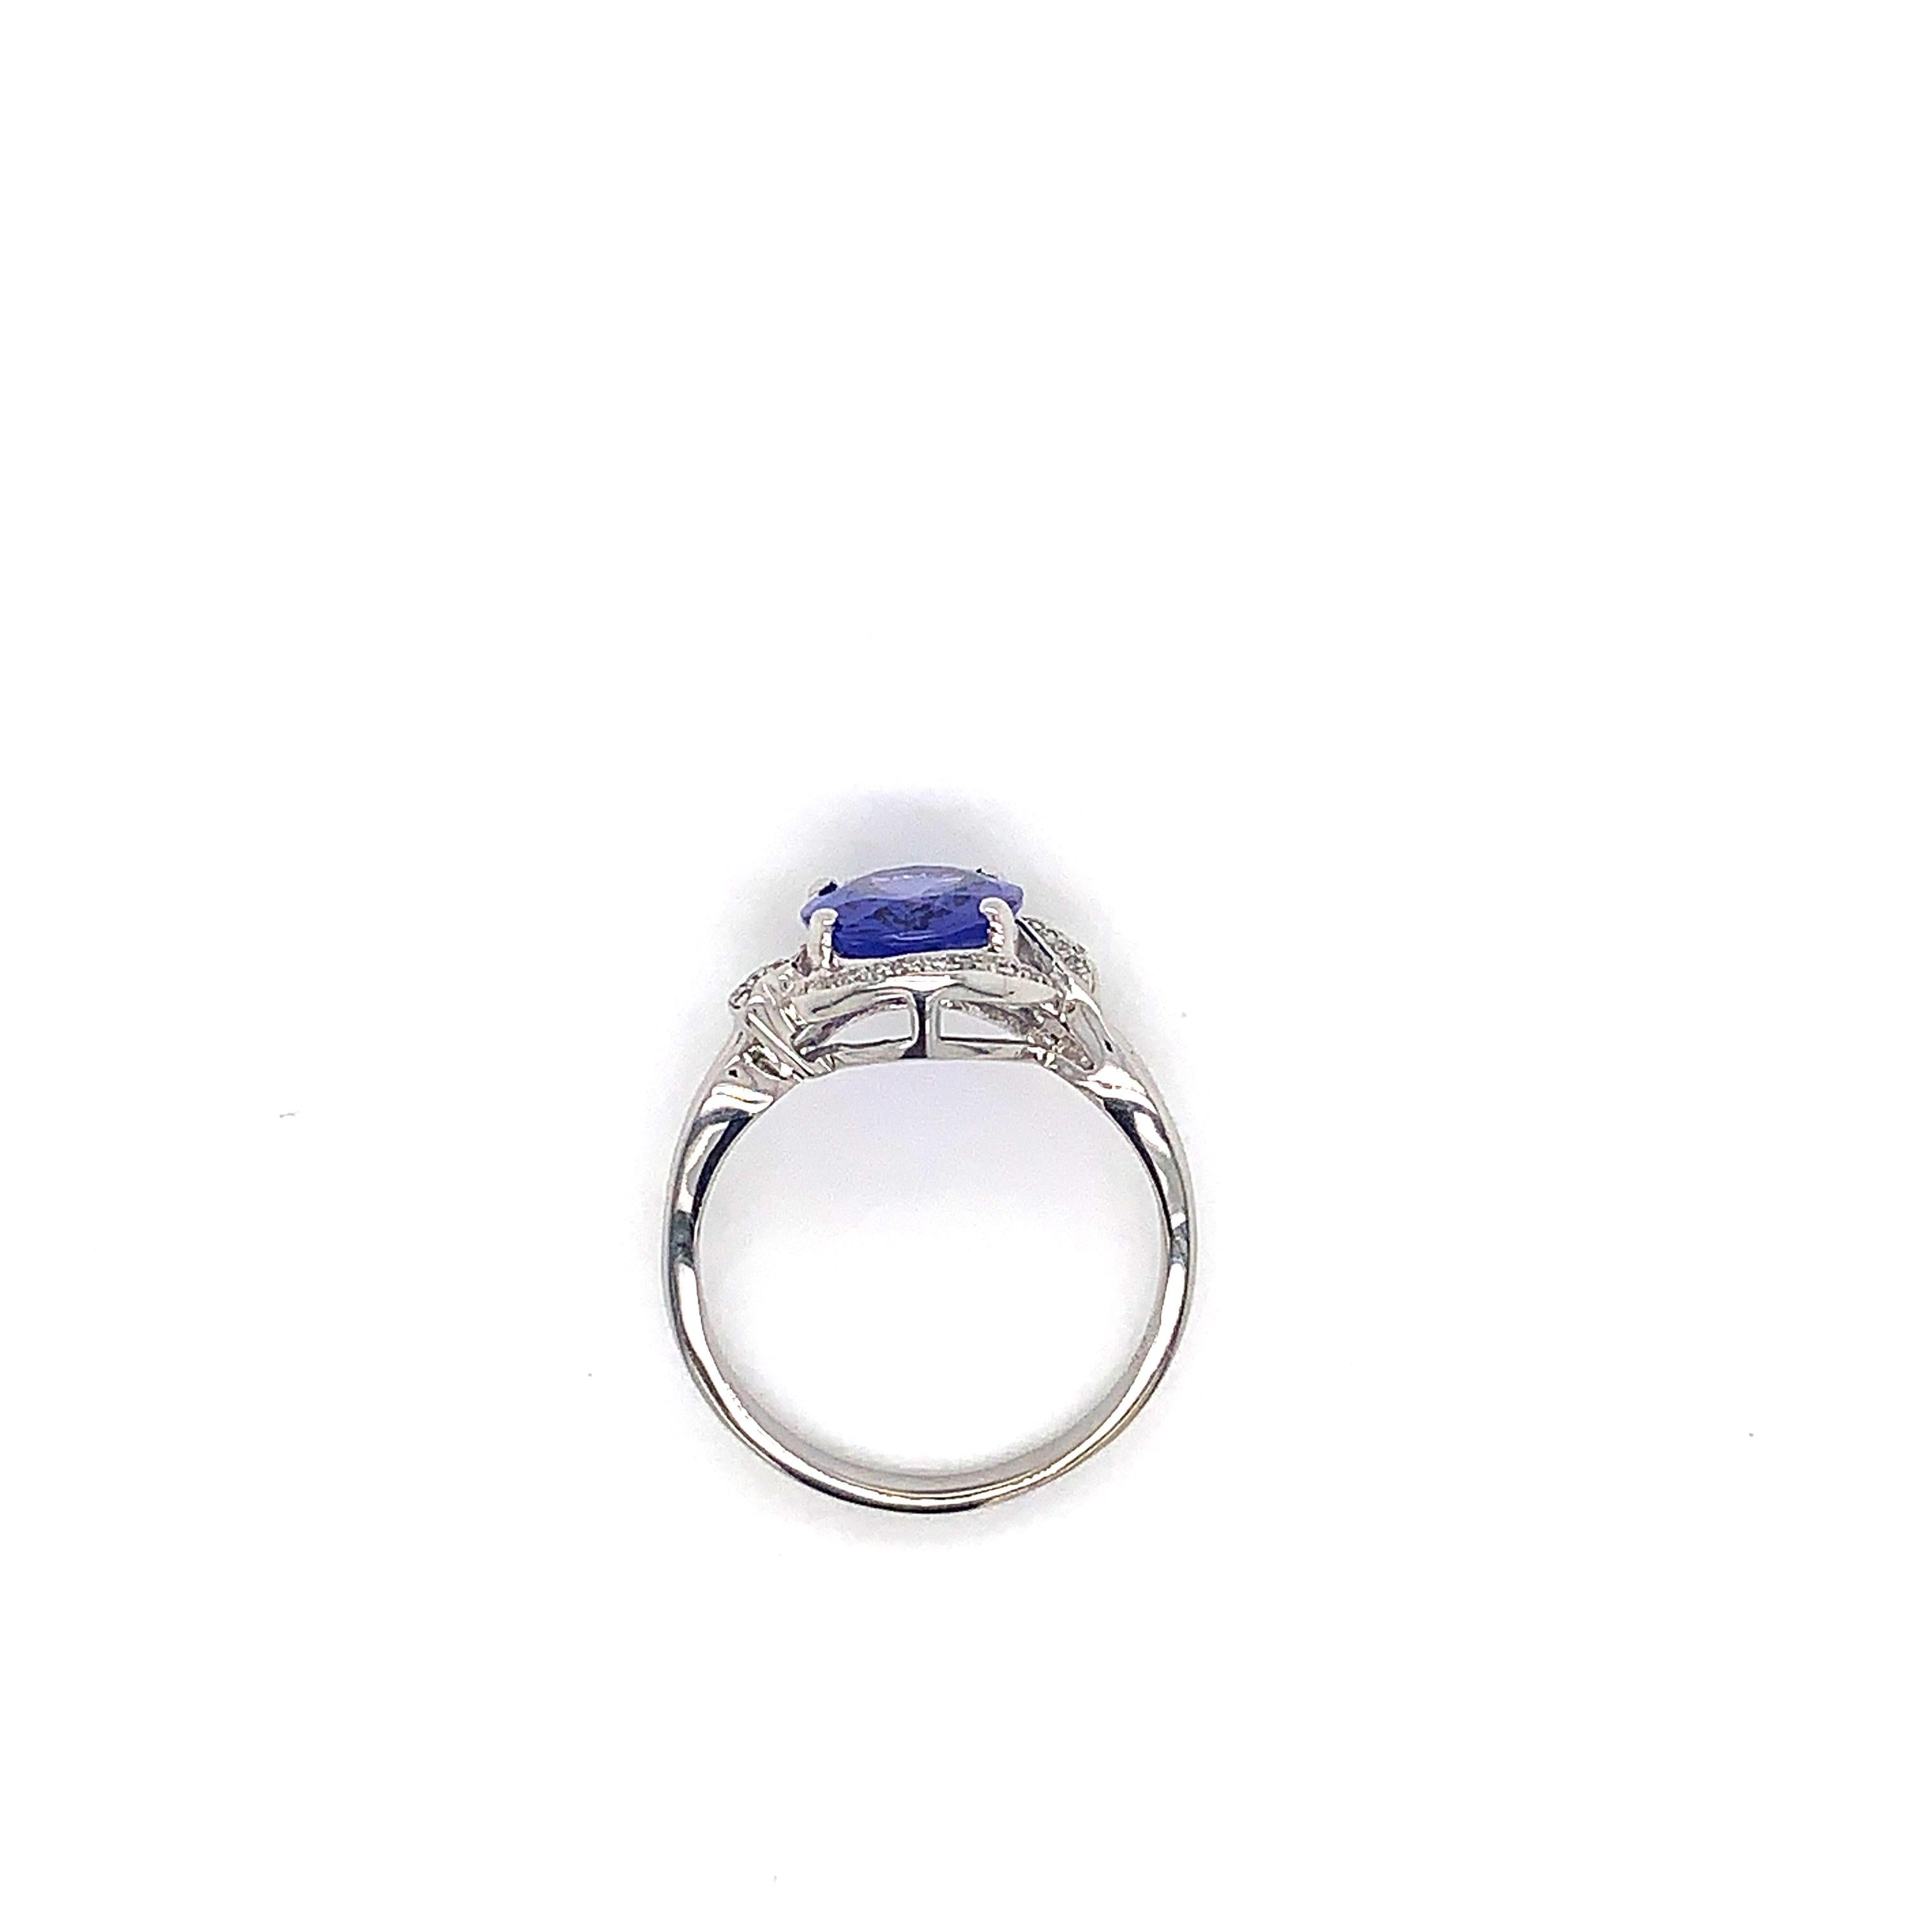 Oval Cut 2.27 Carat Oval Shaped Tanzanite Ring in 18 Karat White Gold with Diamonds For Sale